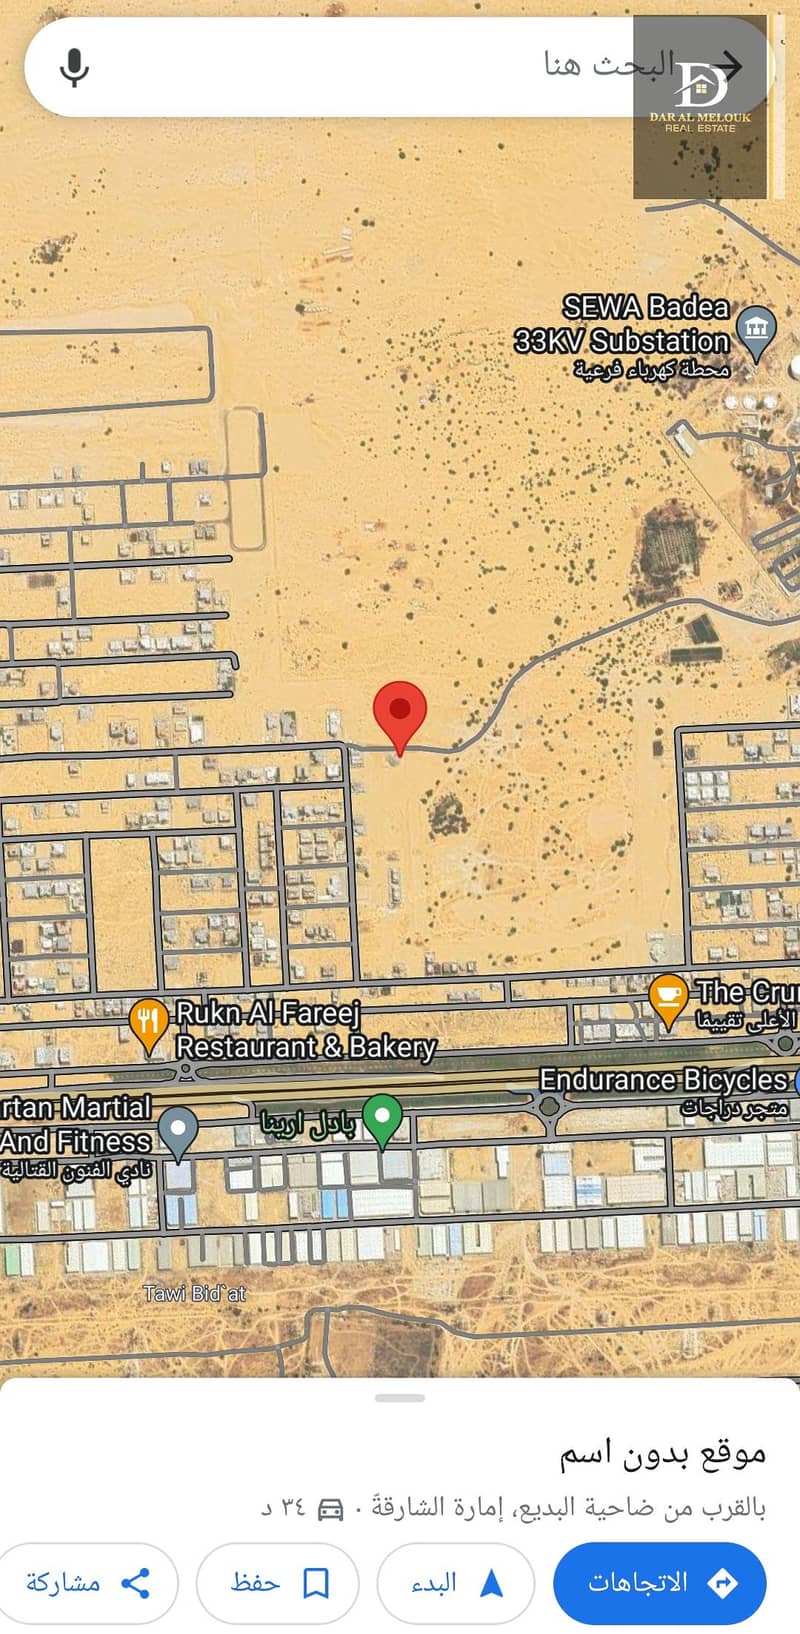 For sale in Sharjah, Al-Hoshi area, residential and investment land, area of ​​4200 feet, villa permit, ground and first, 50% of the roof, excellent location, close to services. The Al-Hoshi area is characterized by easy entry and exit, close to Al-Zaid S